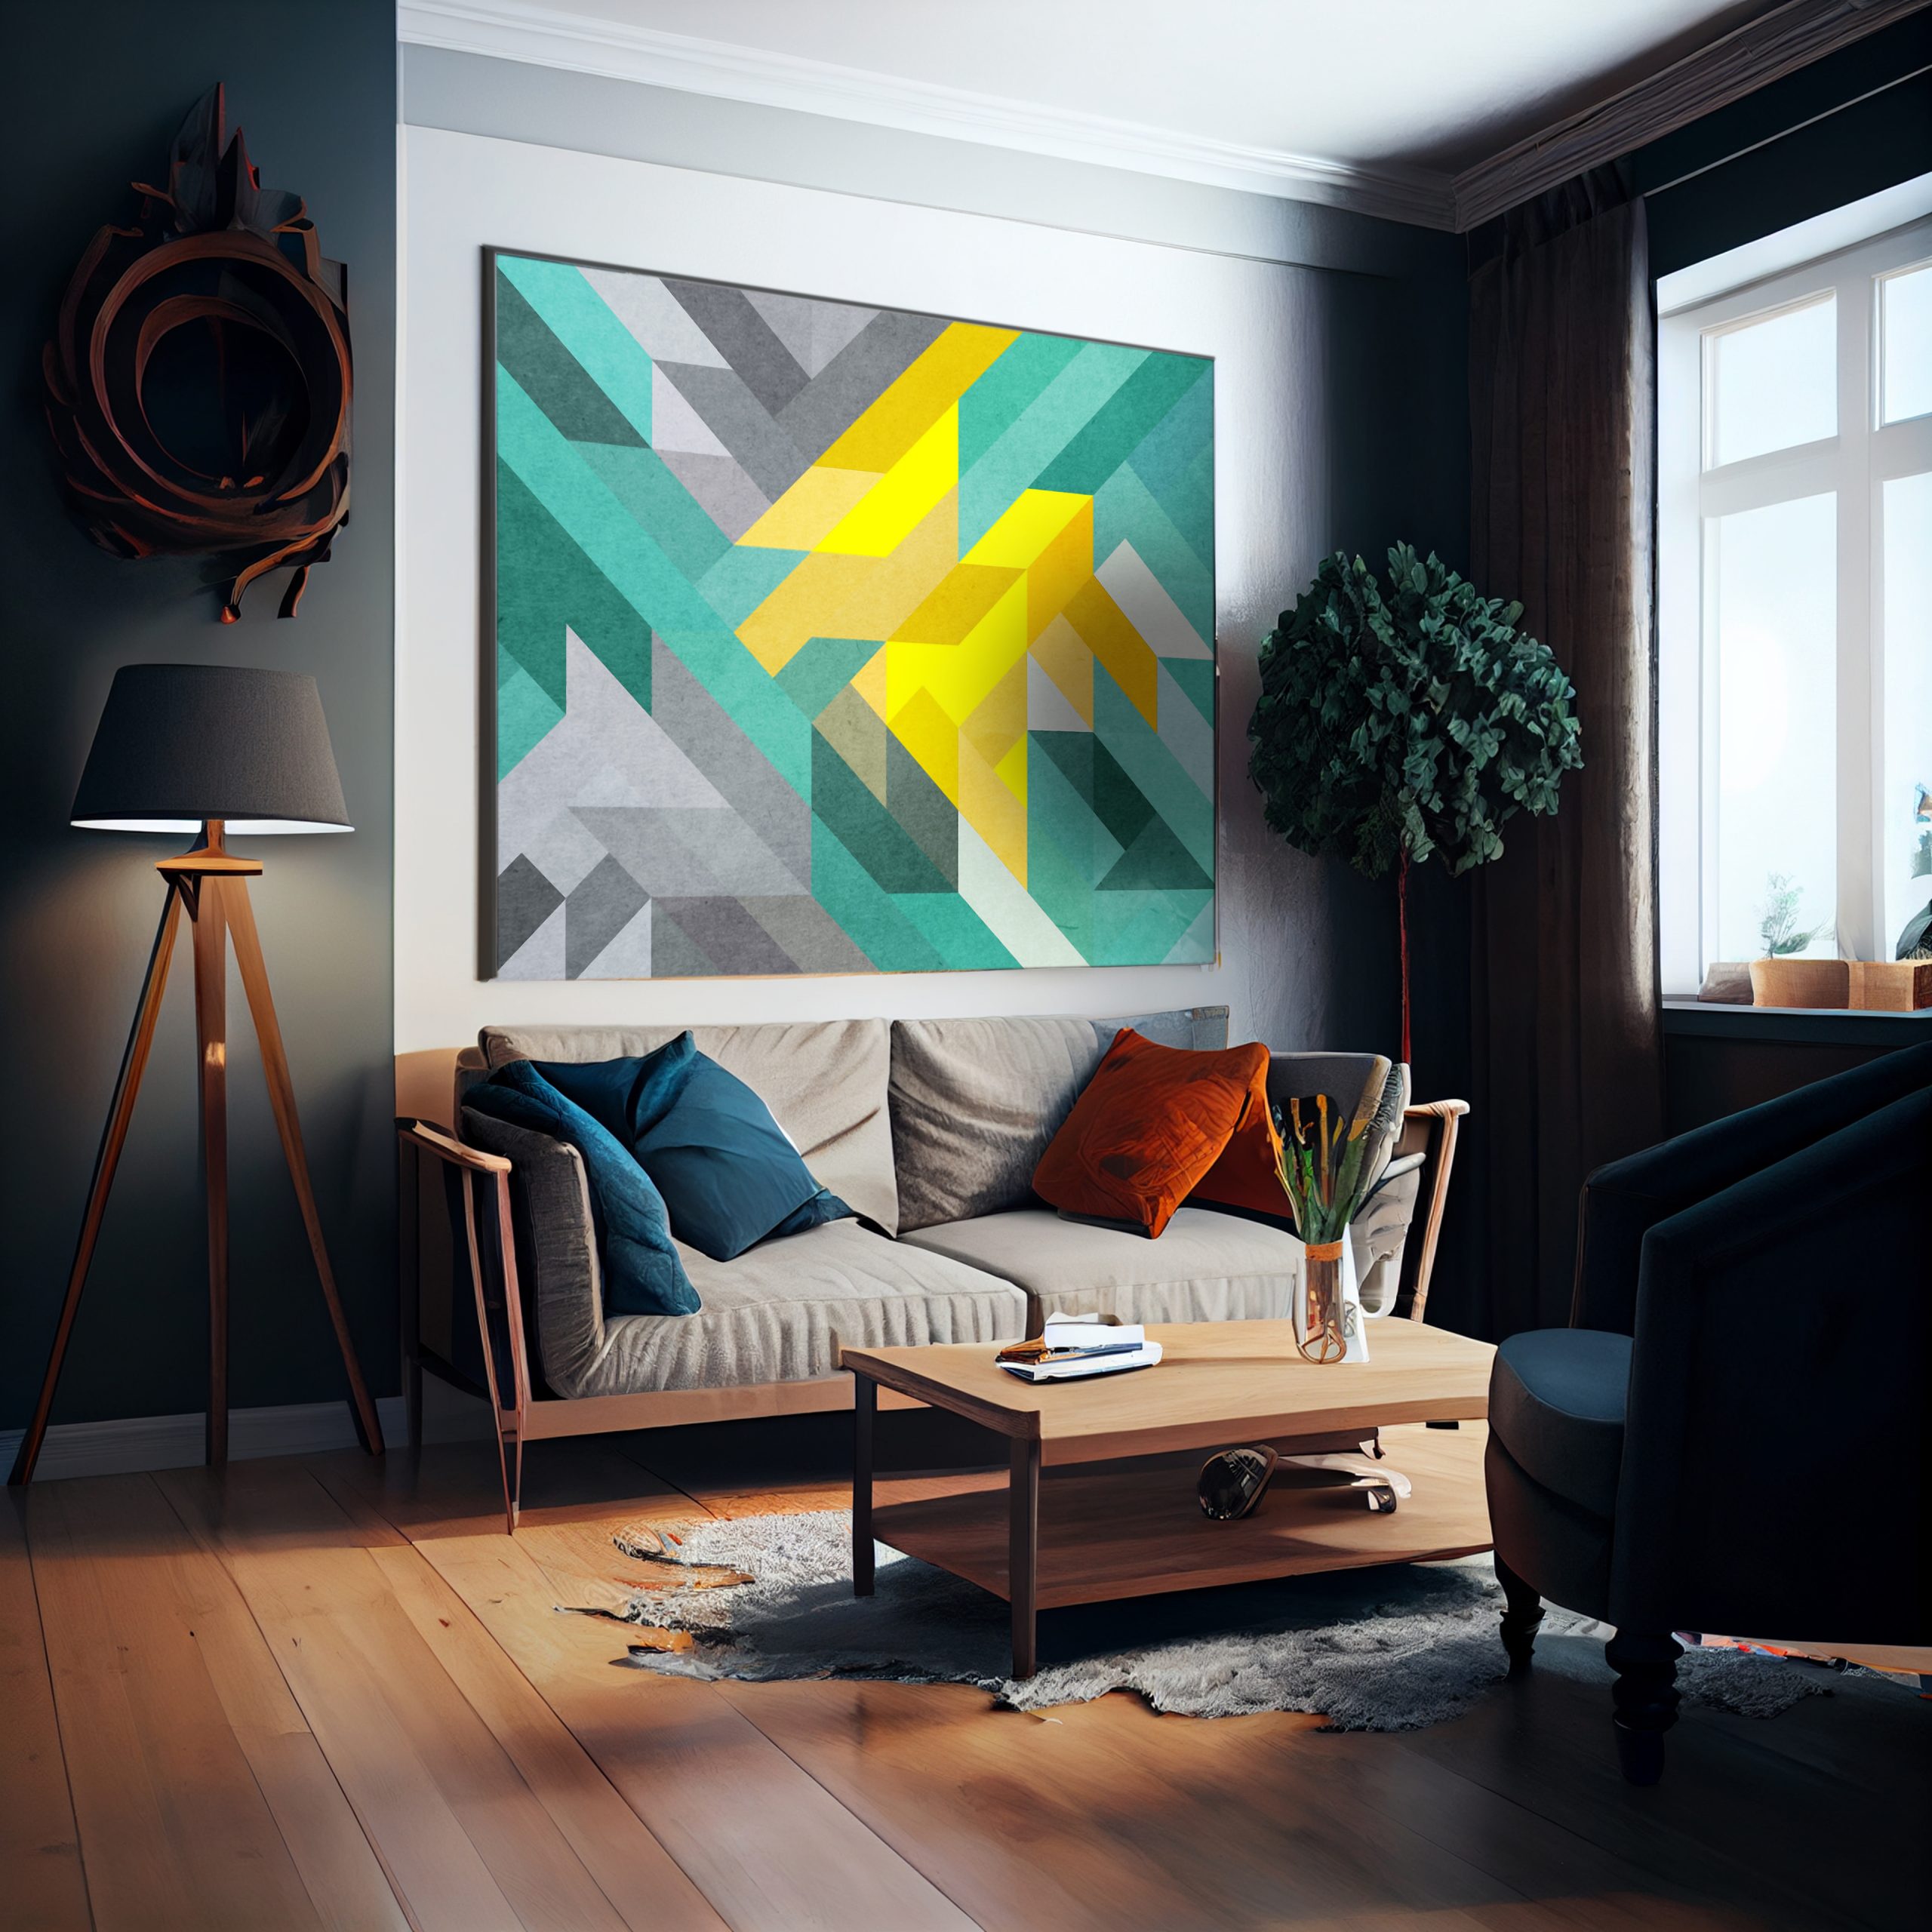 Canvas Prints: The Latest Decorating Wall Art Trend